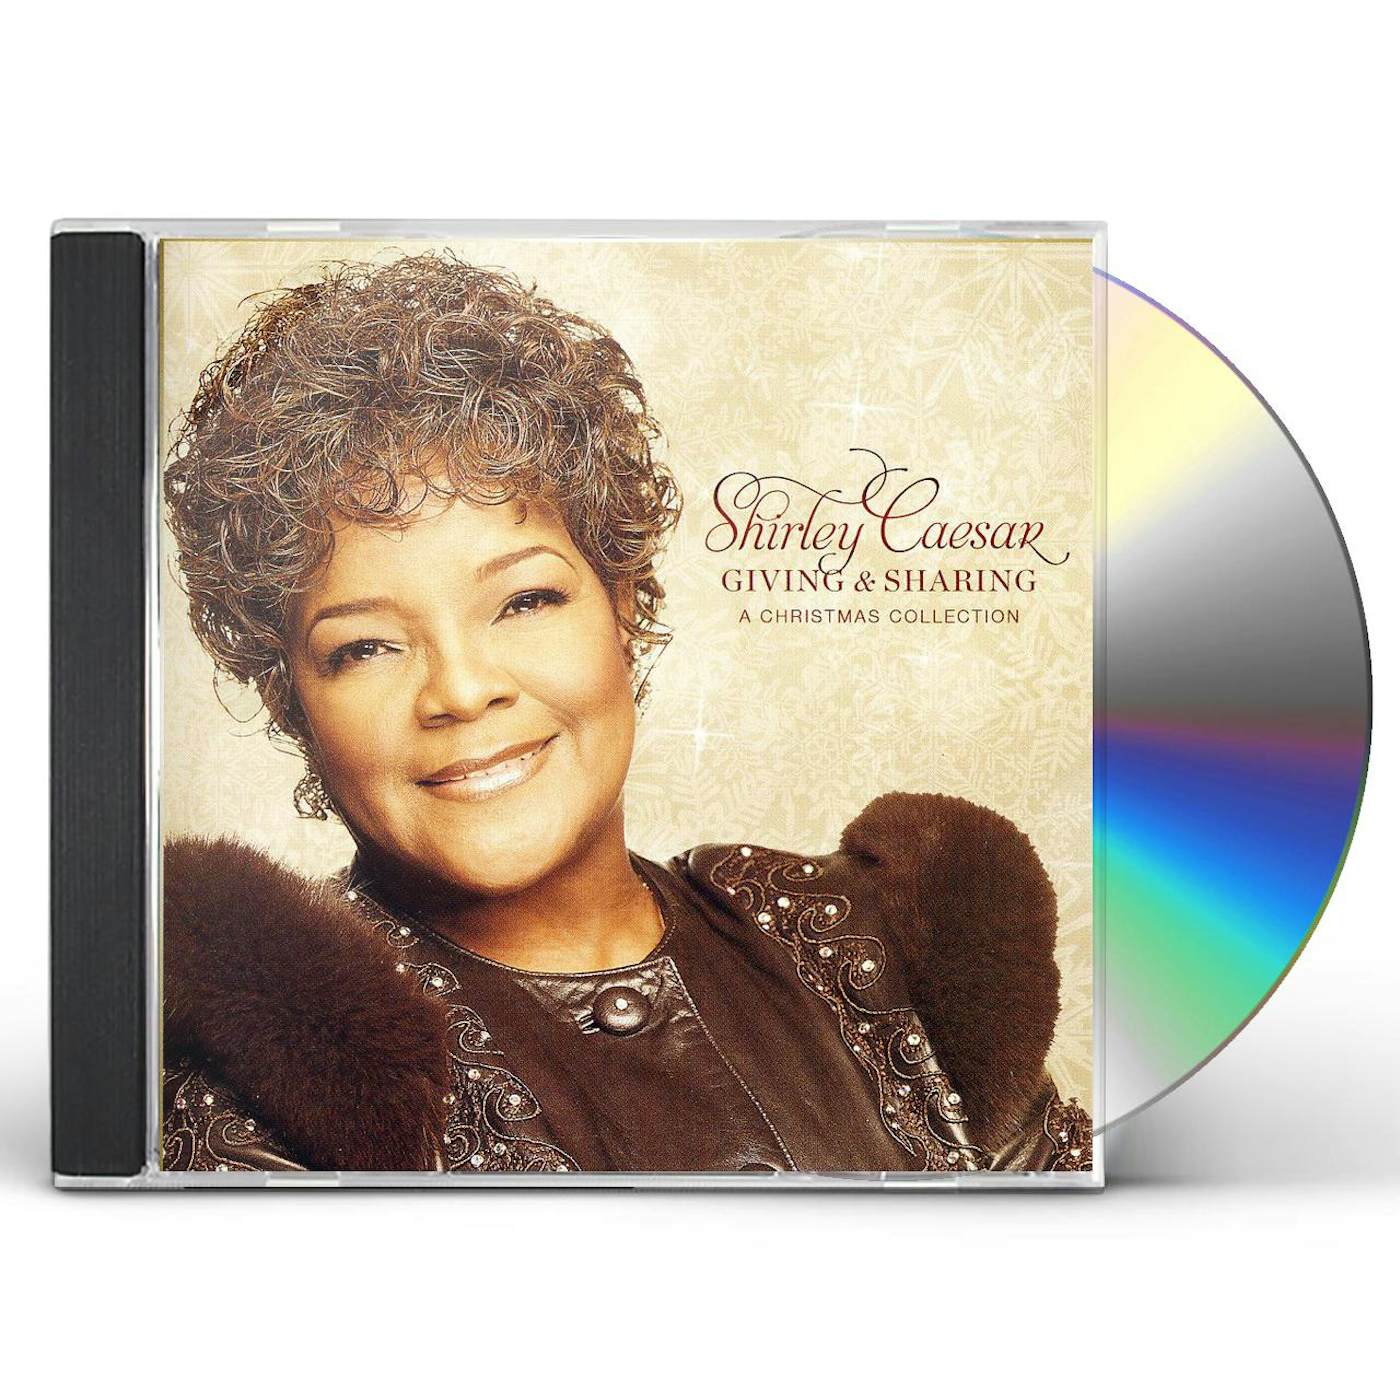 Shirley Caesar GIVING & SHARING: A CHRISTMAS COLLECTION CD